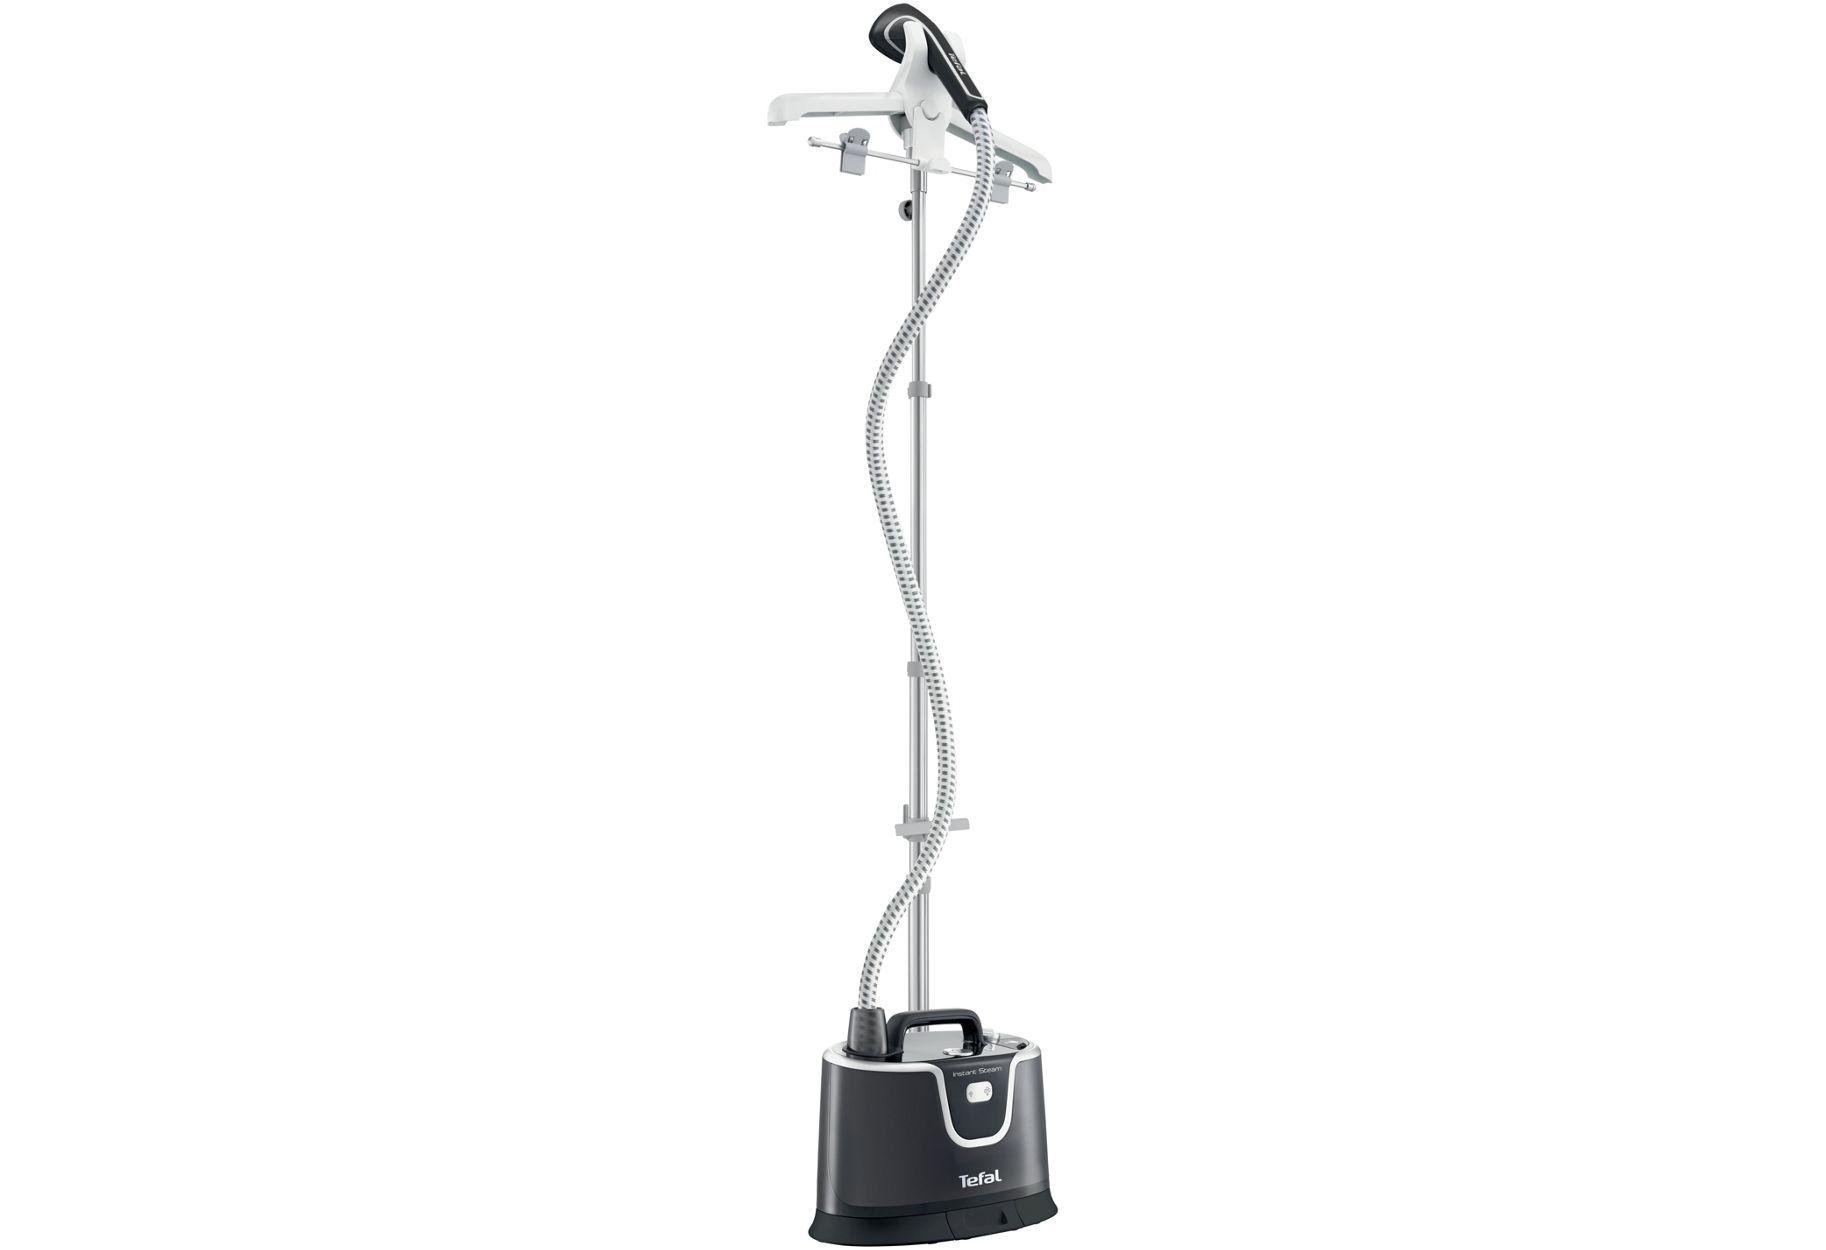 Tefal IS3361 Instant Compact Garment Steamer. Review